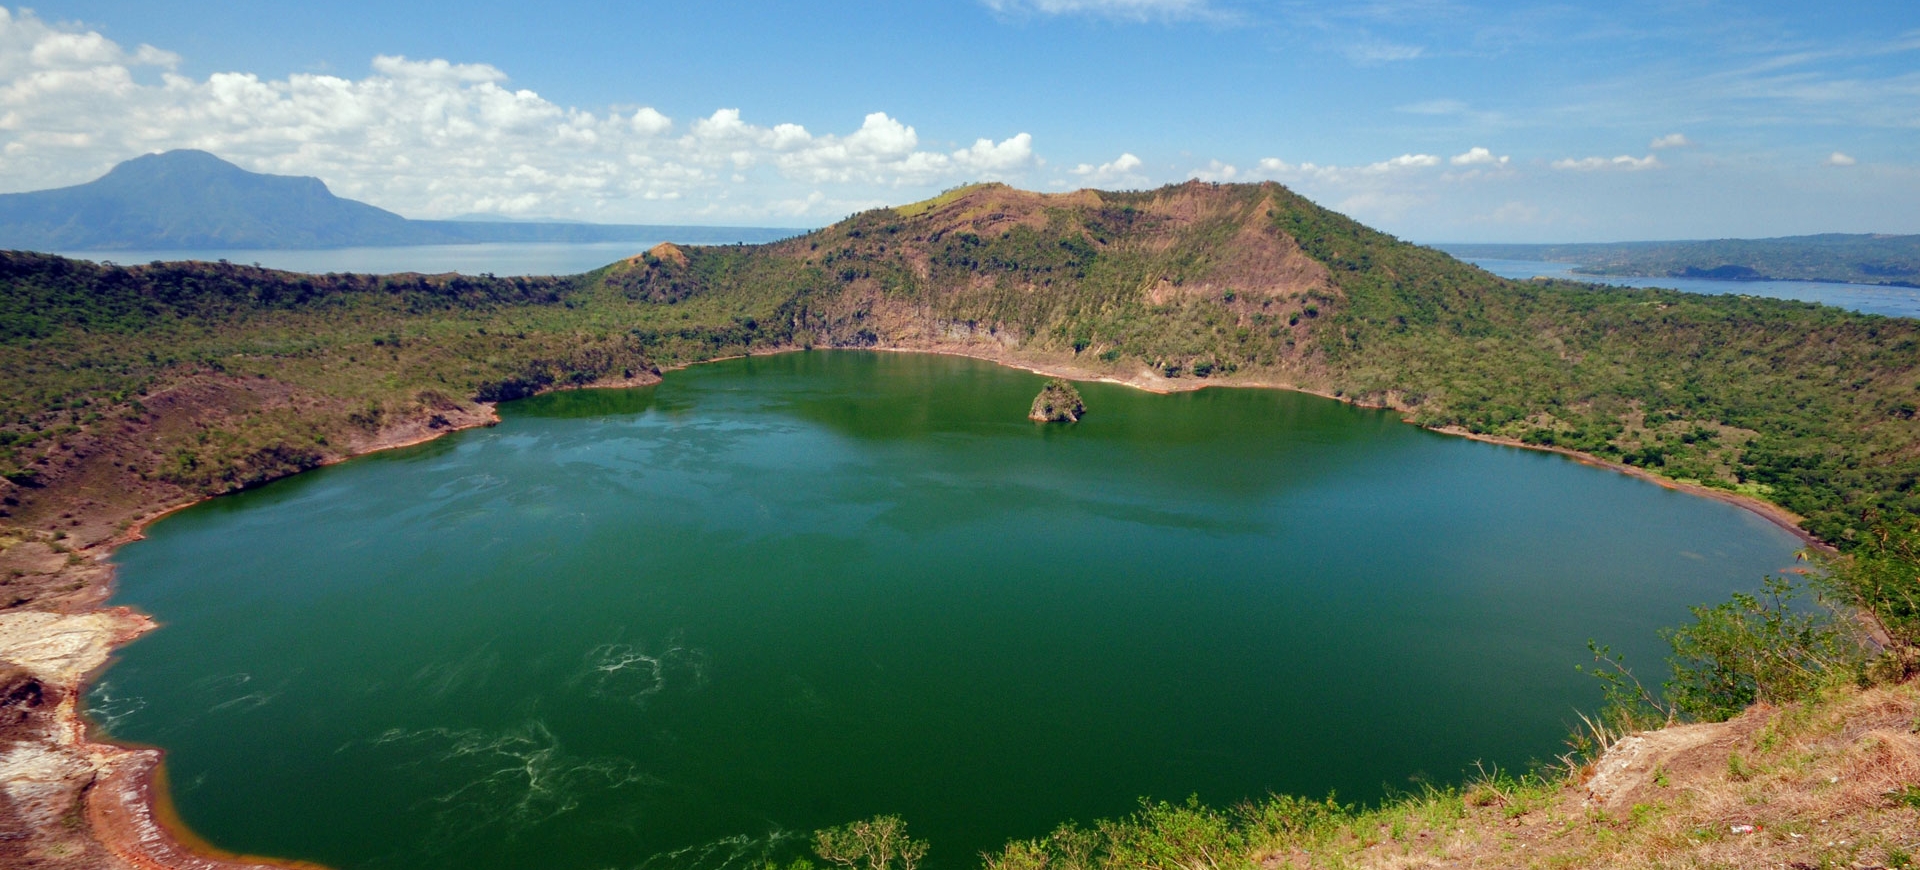 Taal Day Tour: Taal Lake, Taal Volcano and Taal Heritage Town